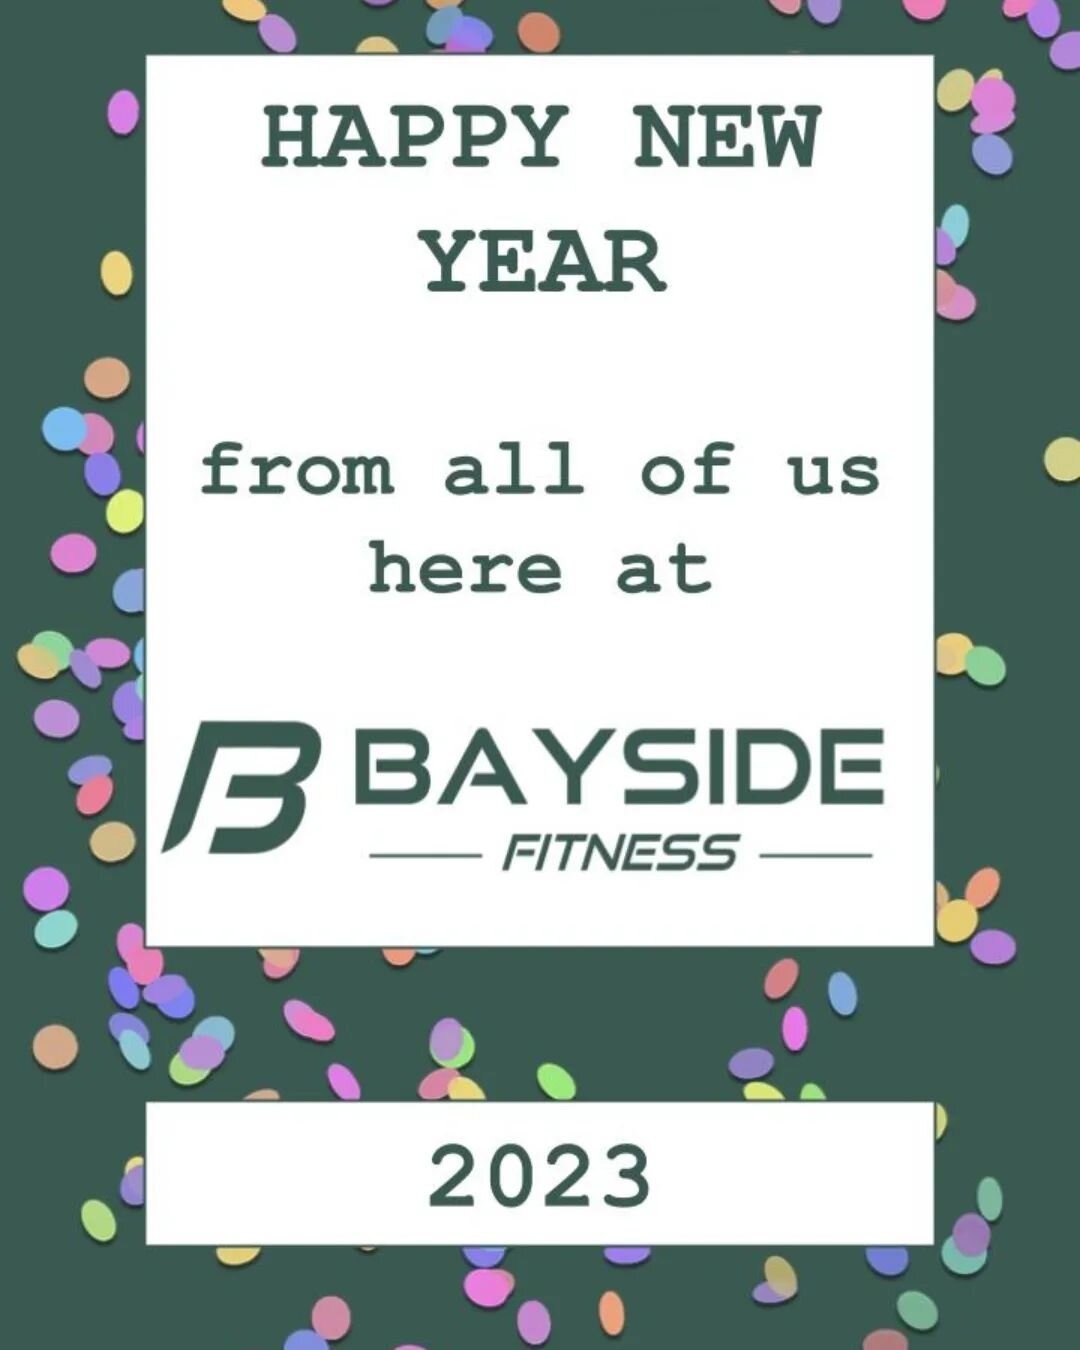 Start this year off in the healthiest way possible, physically and mentally!  We have all the tools you need🏋&zwj;♀️🧘&zwj;♀️ 
Check out our membership options on our website www.baysidefitness.ie or email info@baysidefitness.ie if you have any ques